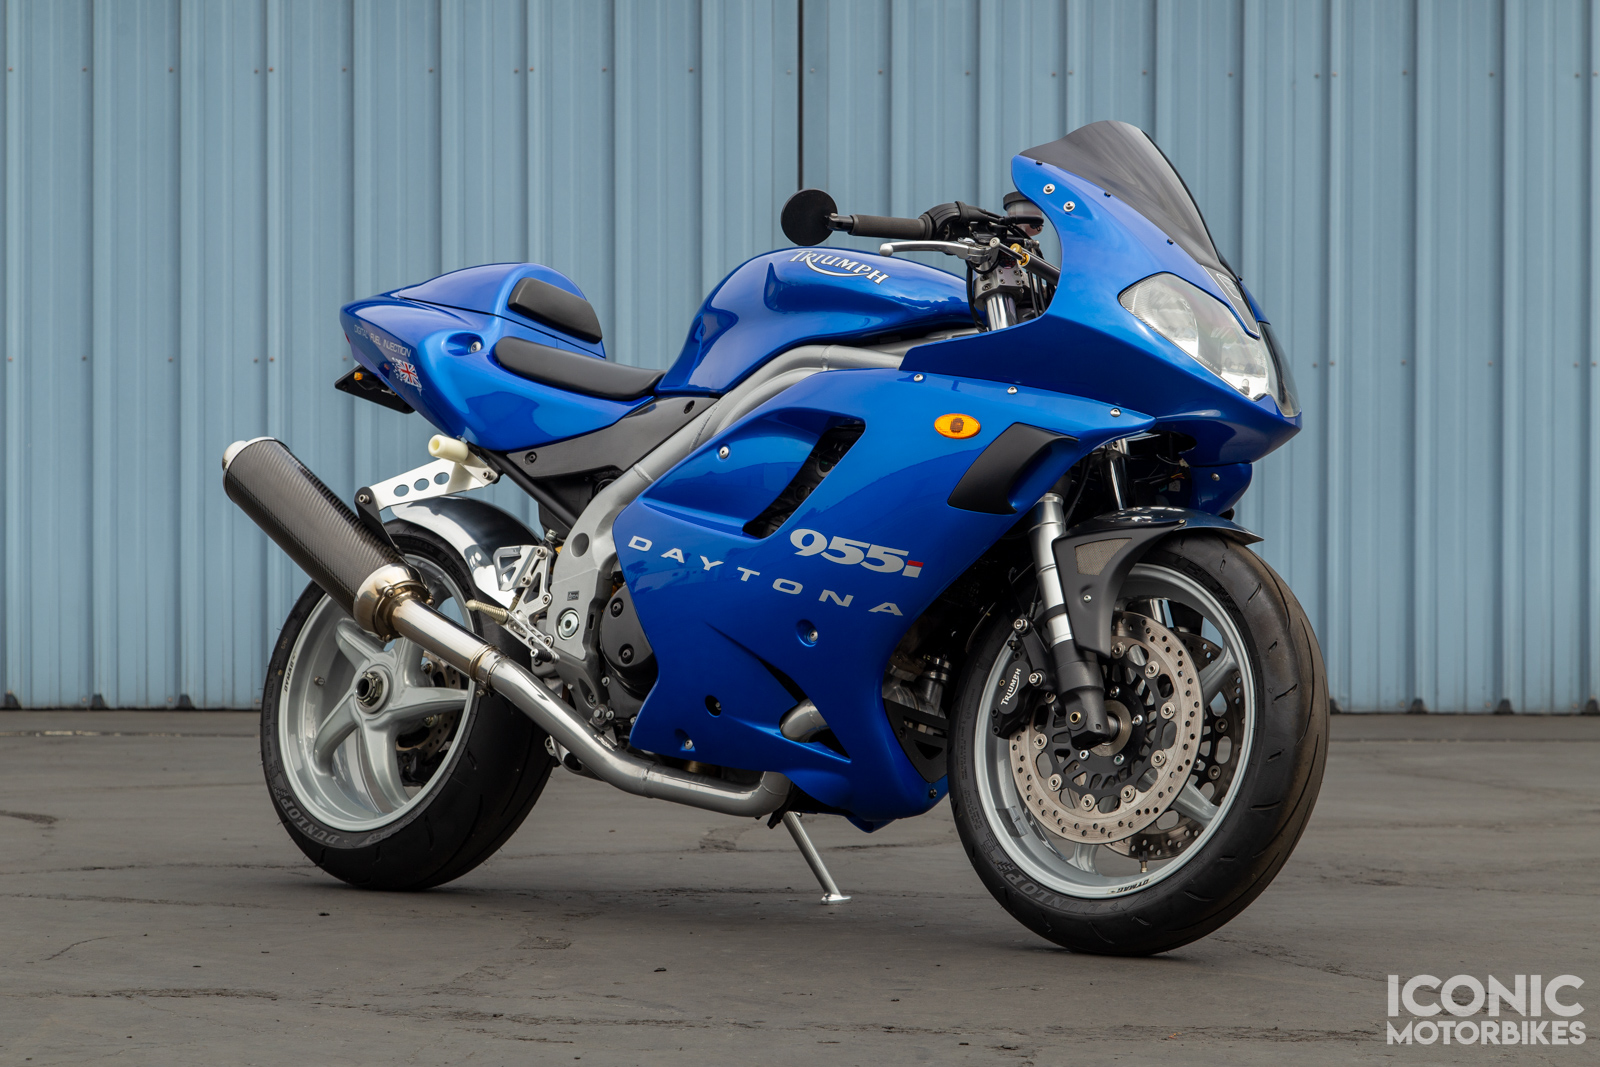 Afvise restaurant trimme 2002 Triumph Daytona 955i Centennial Edition With Turbo – Iconic Motorbike  Auctions